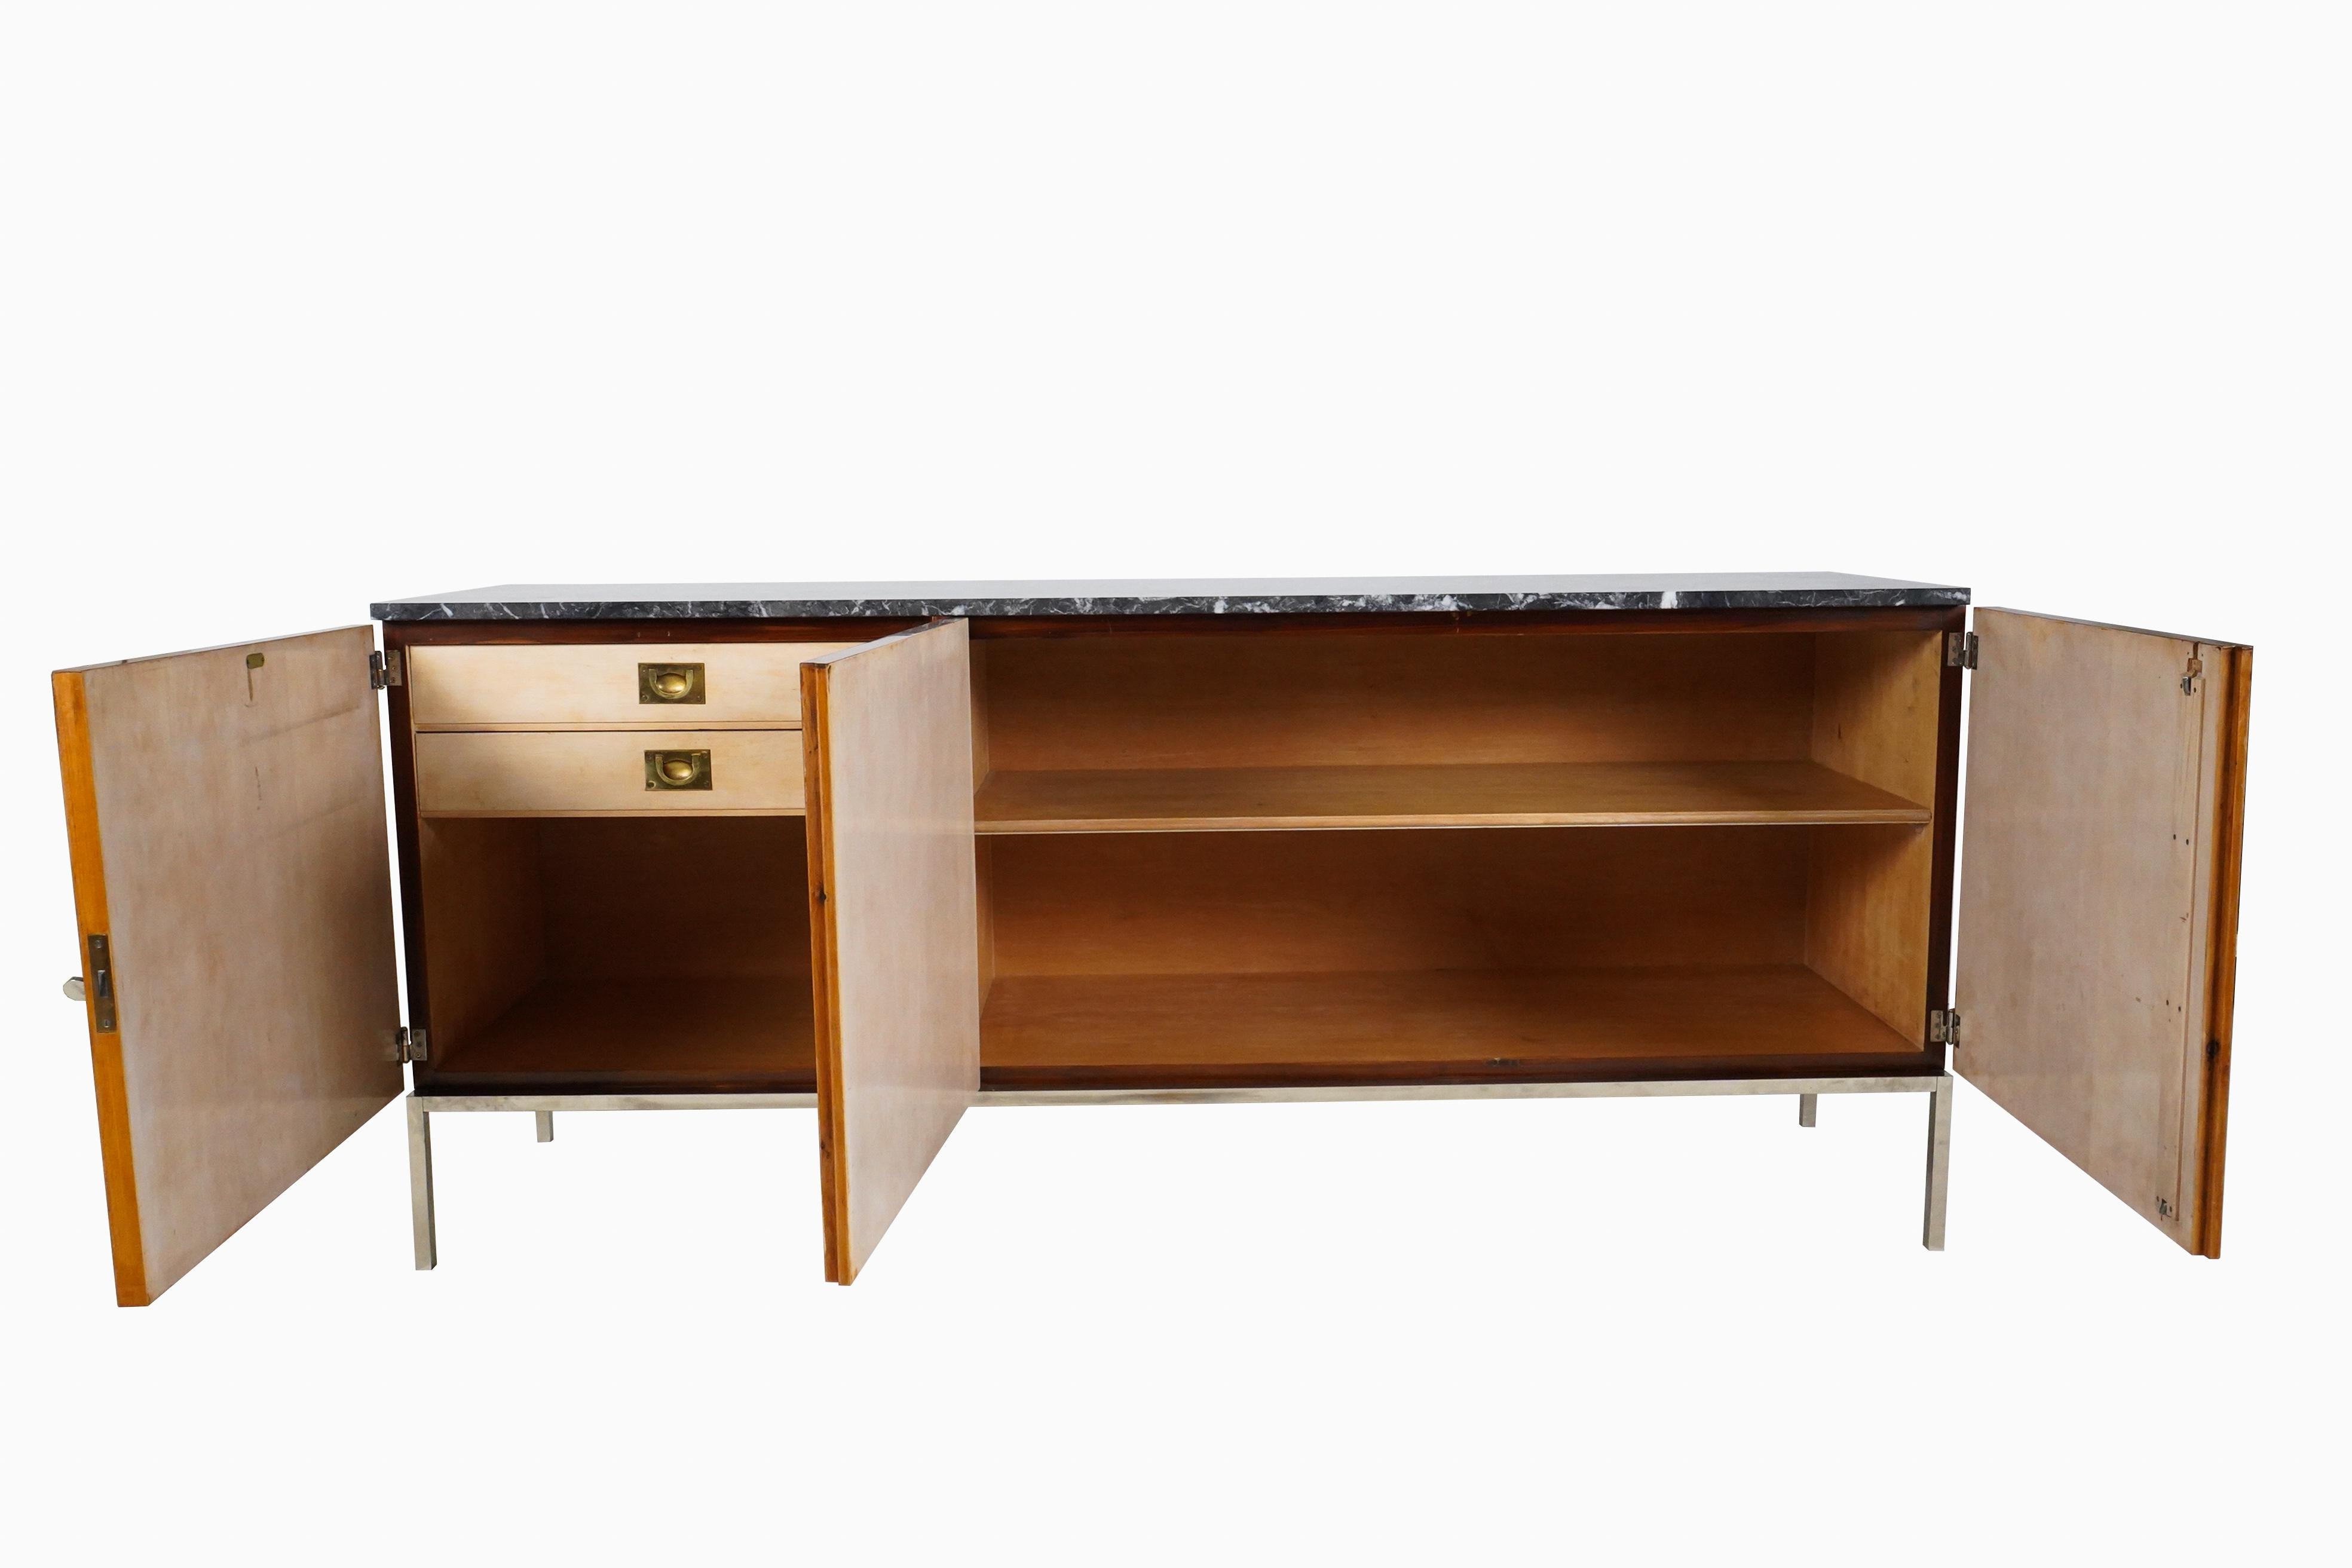 Hungarian A Midcentury Sideboard with a Stainless Steel Base and Marble Top  For Sale